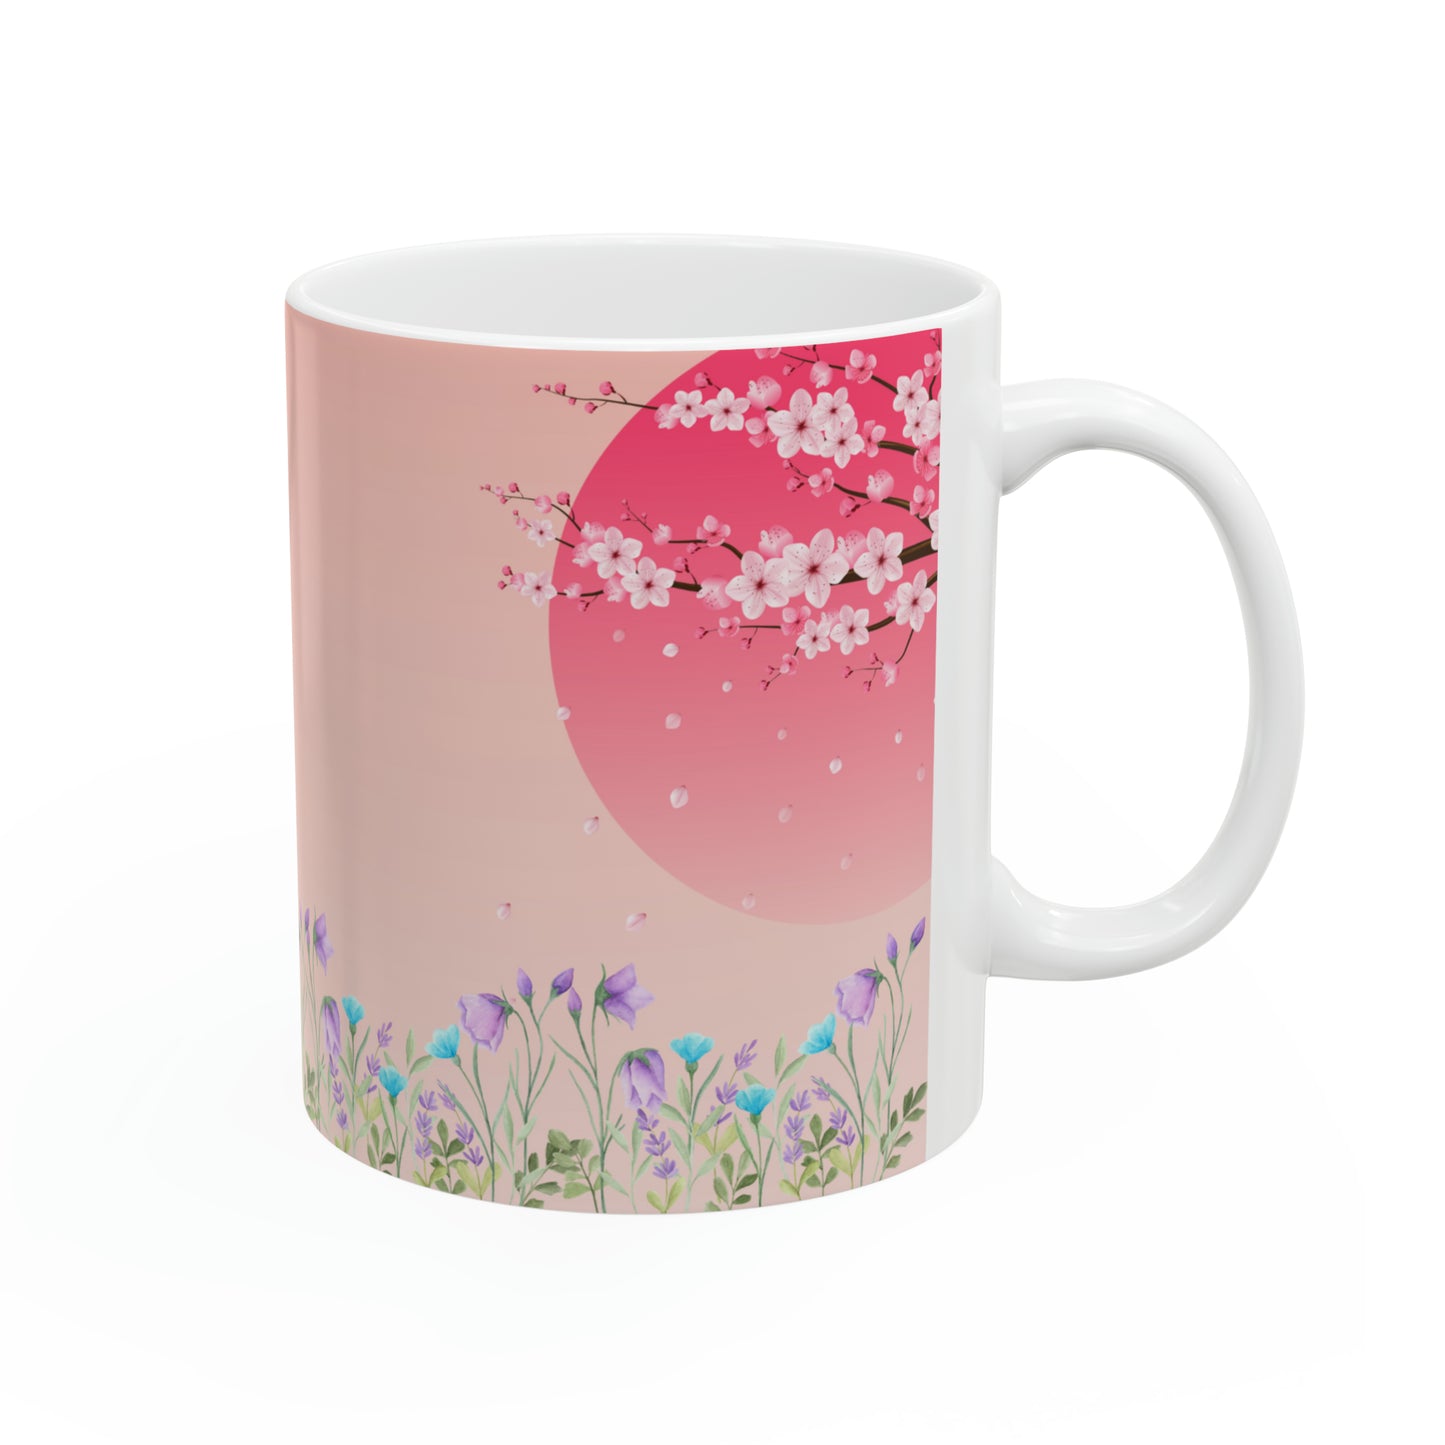 Inspired by Spring: Irresistible Butterfly Letter I - Spring Mug